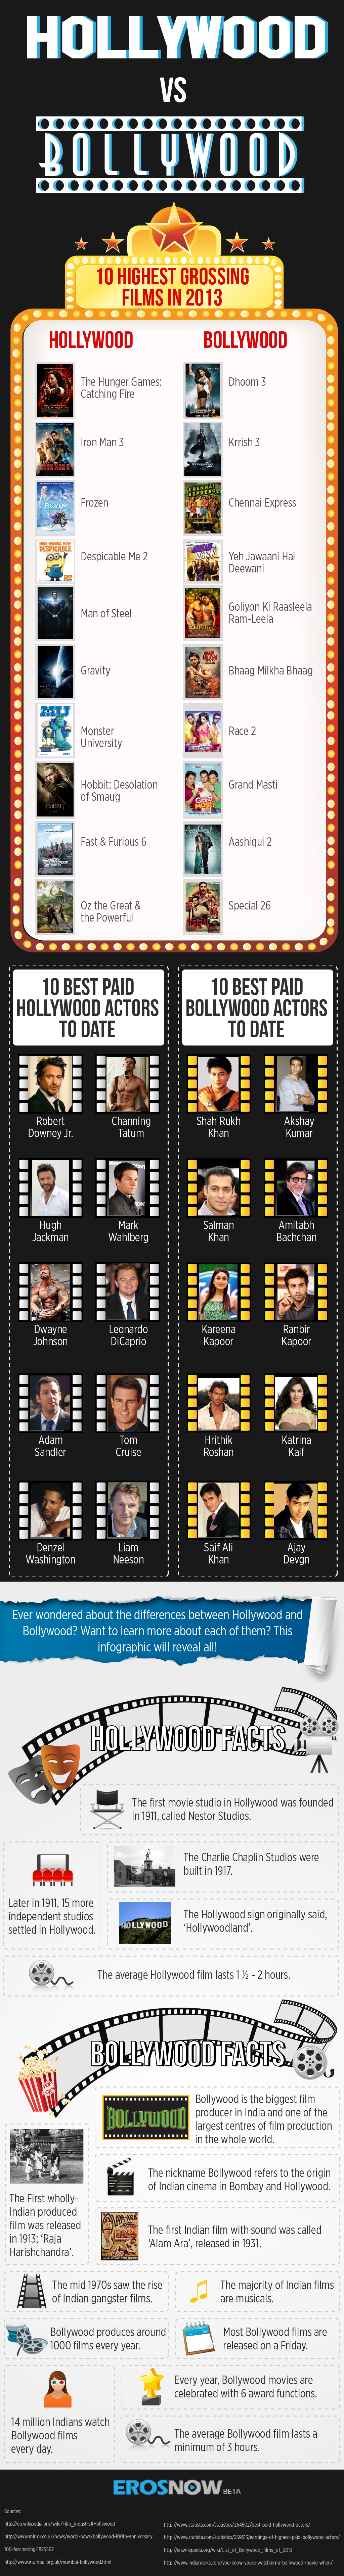 Hollywood vs Bollywood Infographic